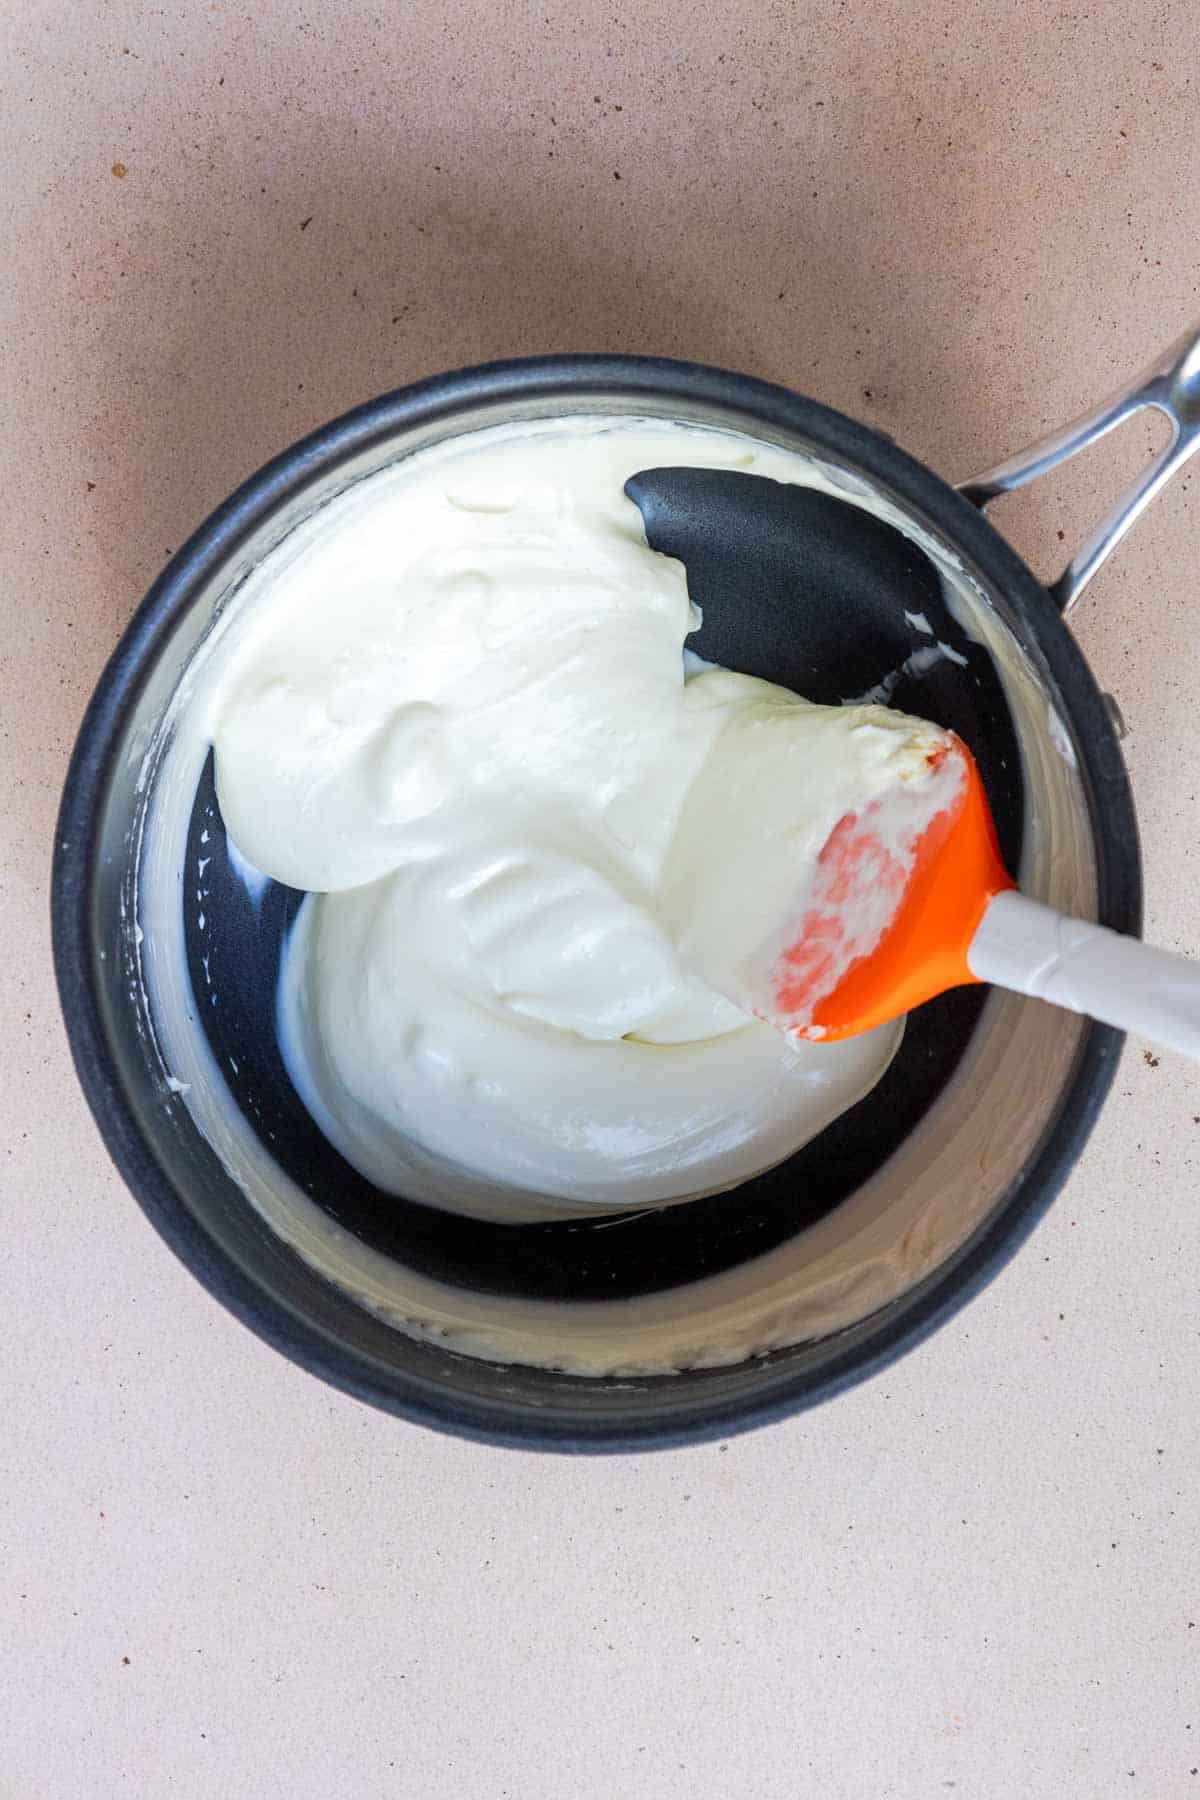 The heavy cream and cream cheese are heated in a medium saucepan until the cream cheese is melted and smooth.